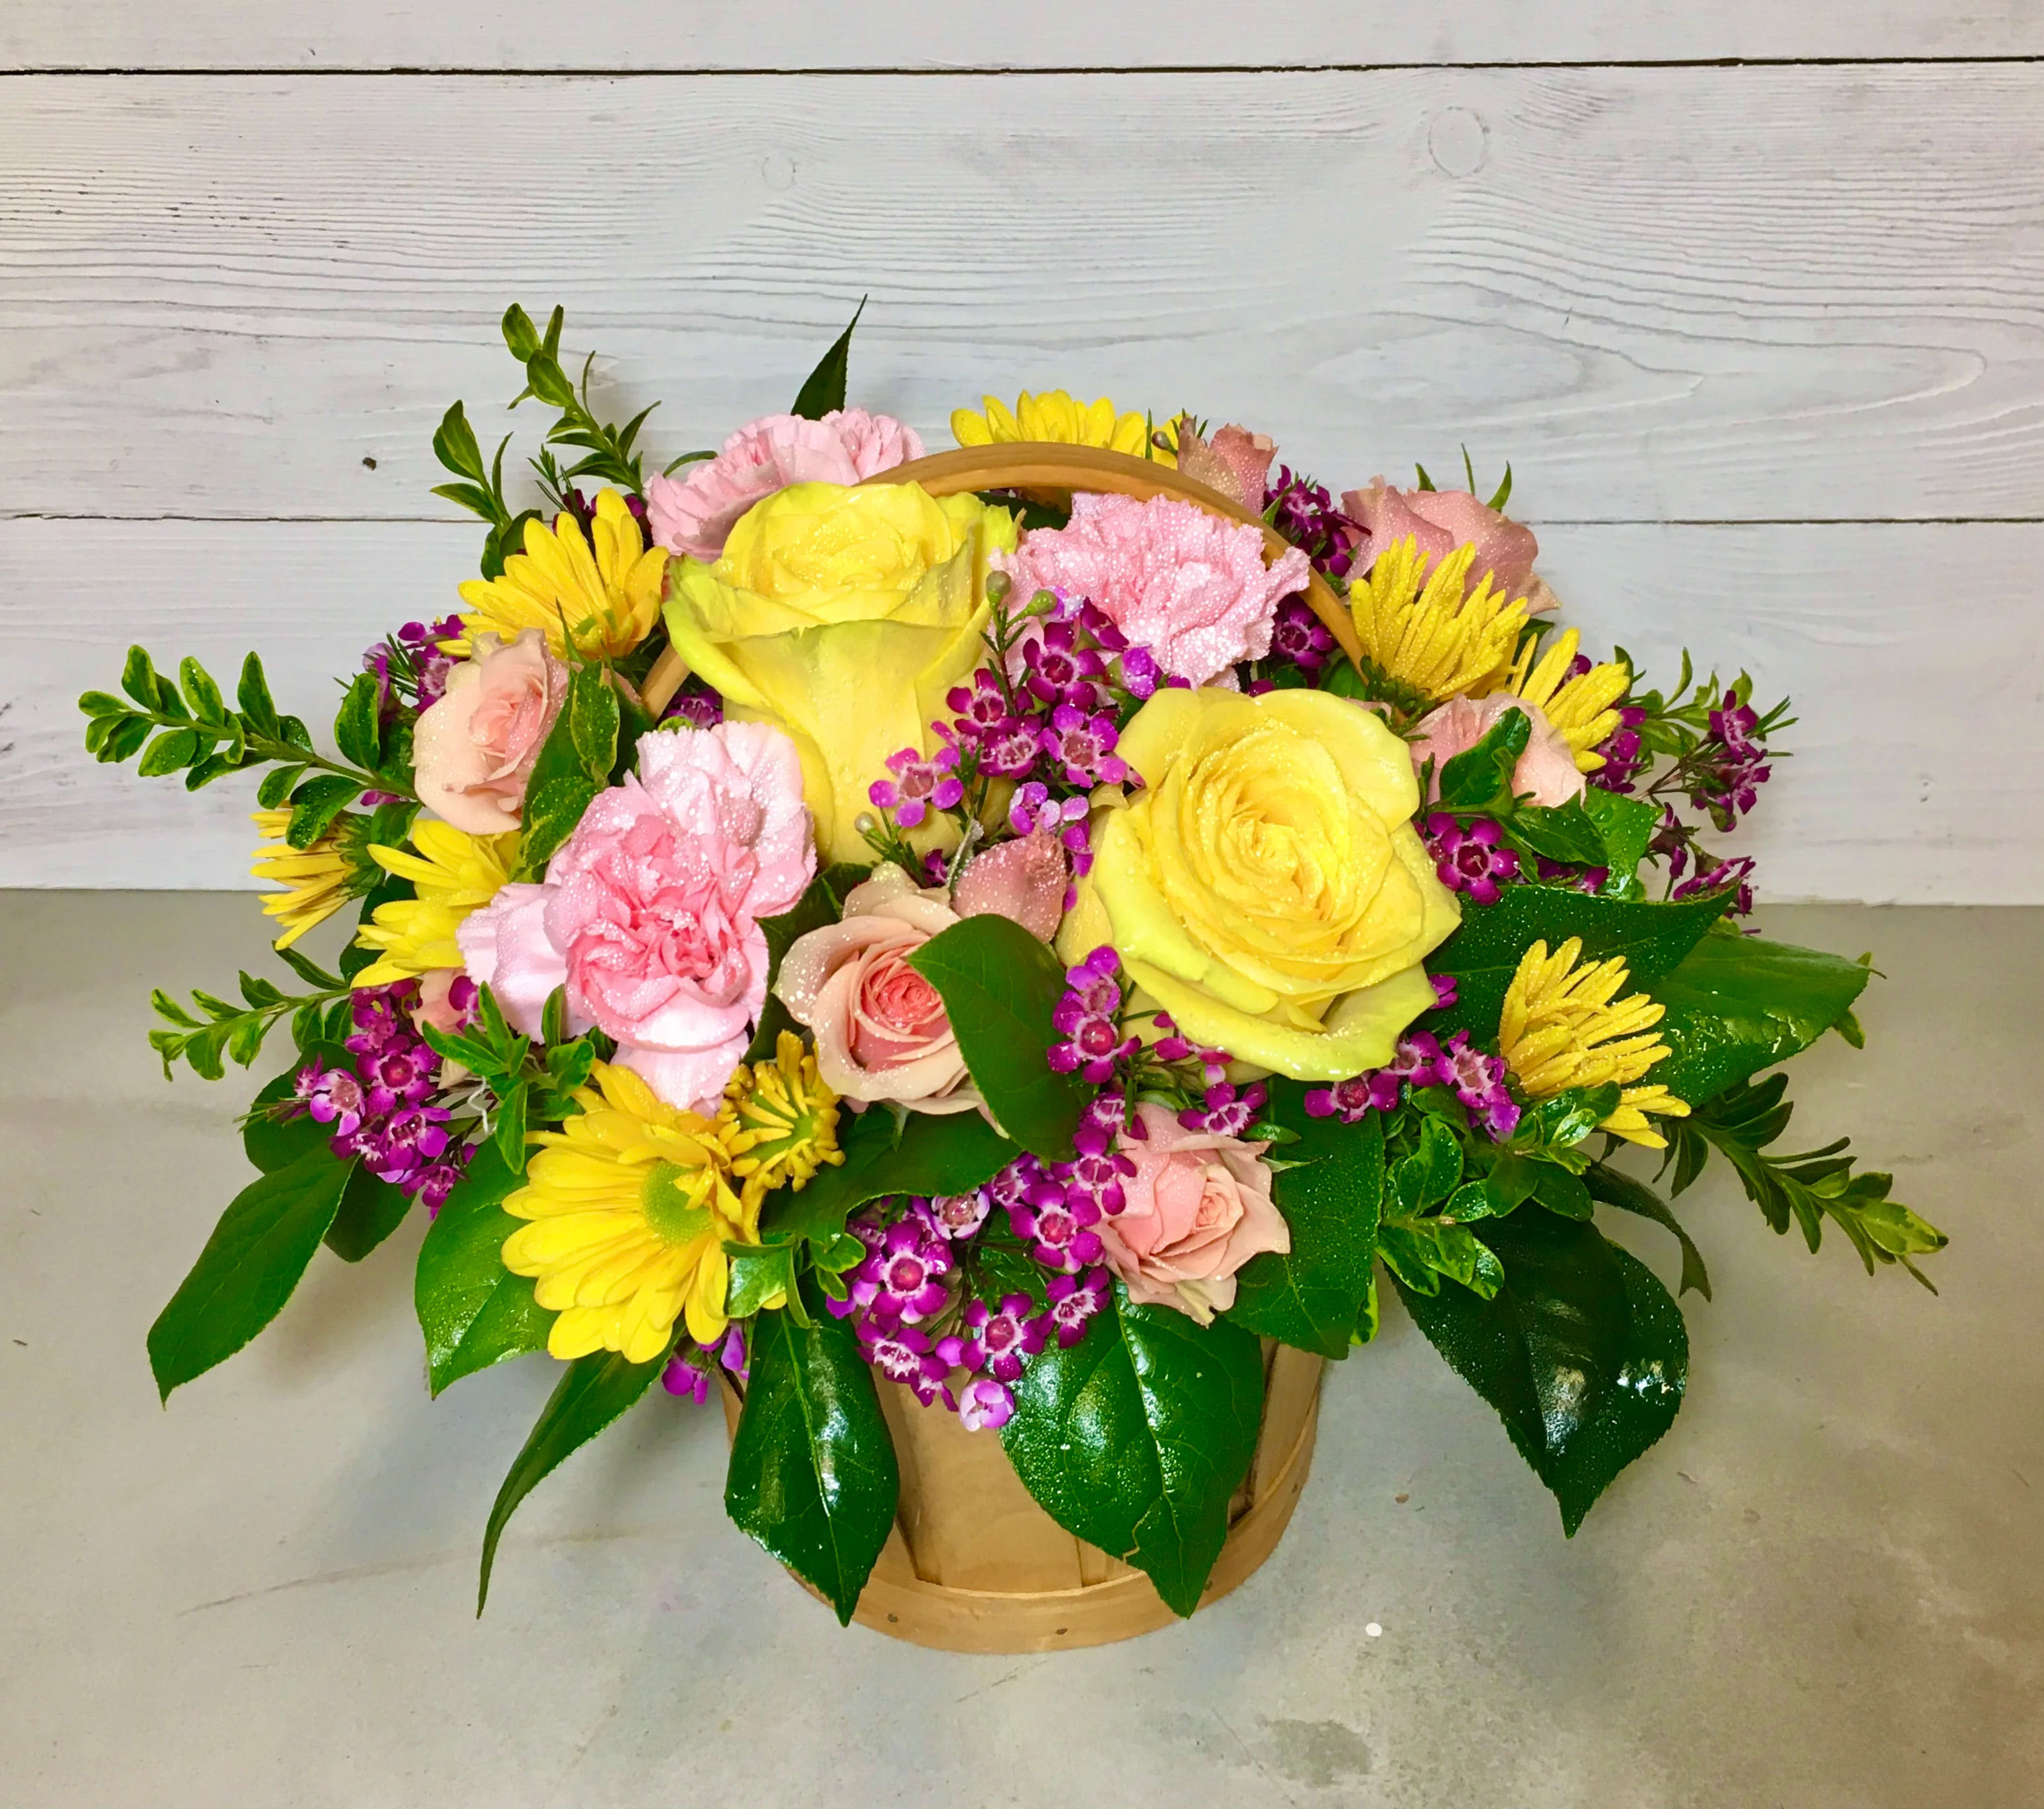 Spring Basket  - This arrangement features a mix of spring flowers including roses, carnations, daisies, greens, and filler in a basket. Colors may very. Due to various factors, substitutions may apply. If substitutions are necessary, the utmost care and attention will be given to your order to ensure it is as similar as possible to the requested item